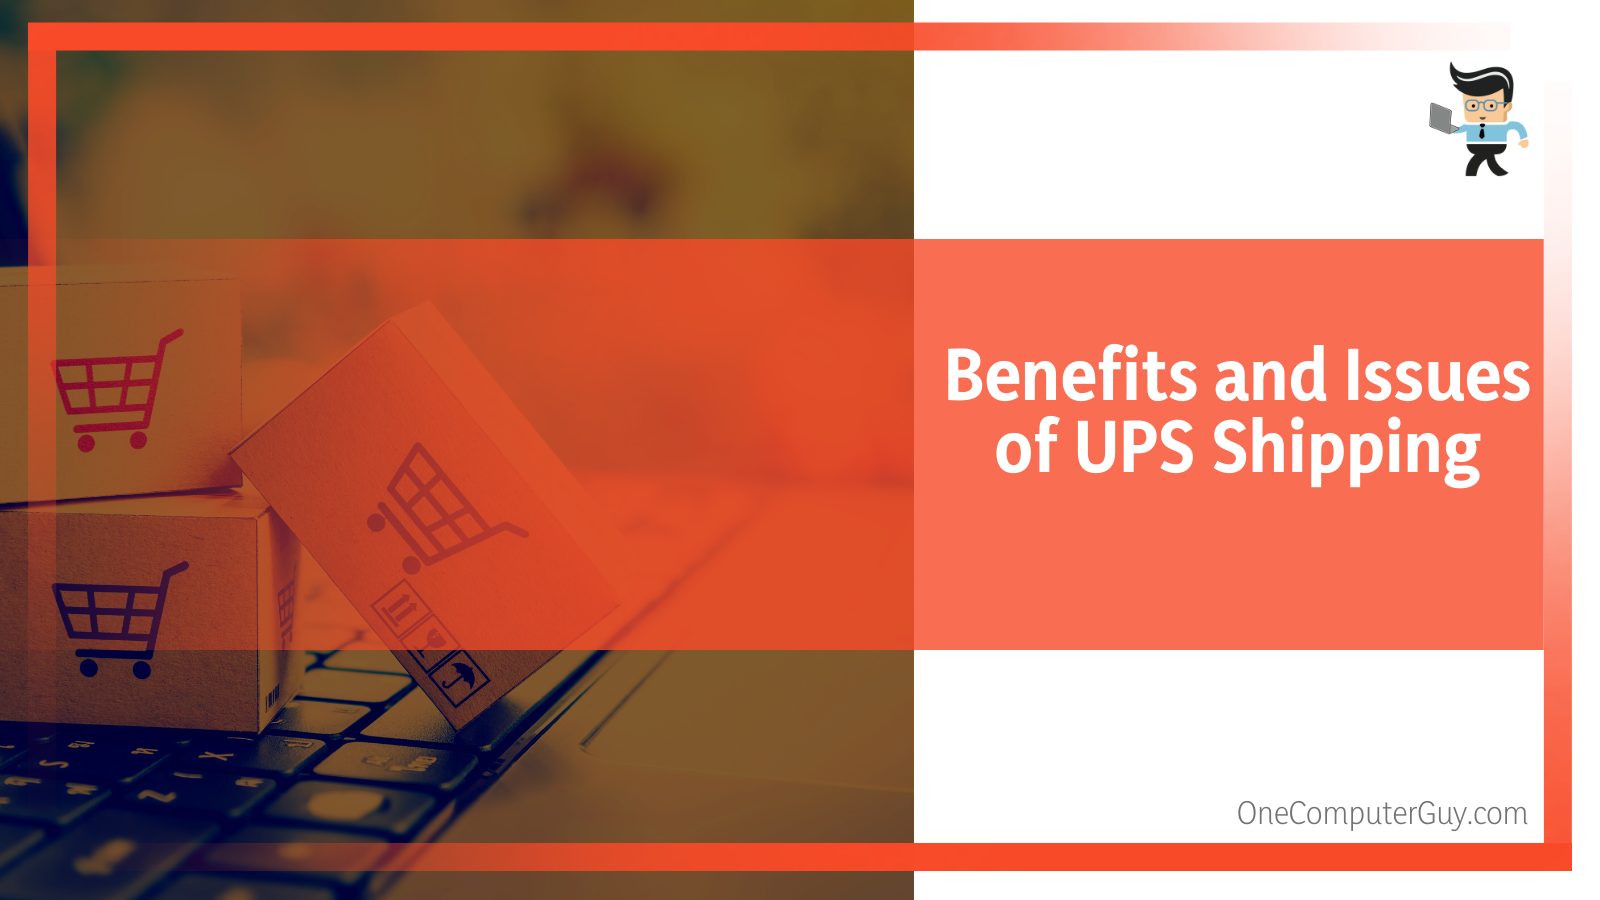 Benefits and Issues of UPS Shipping